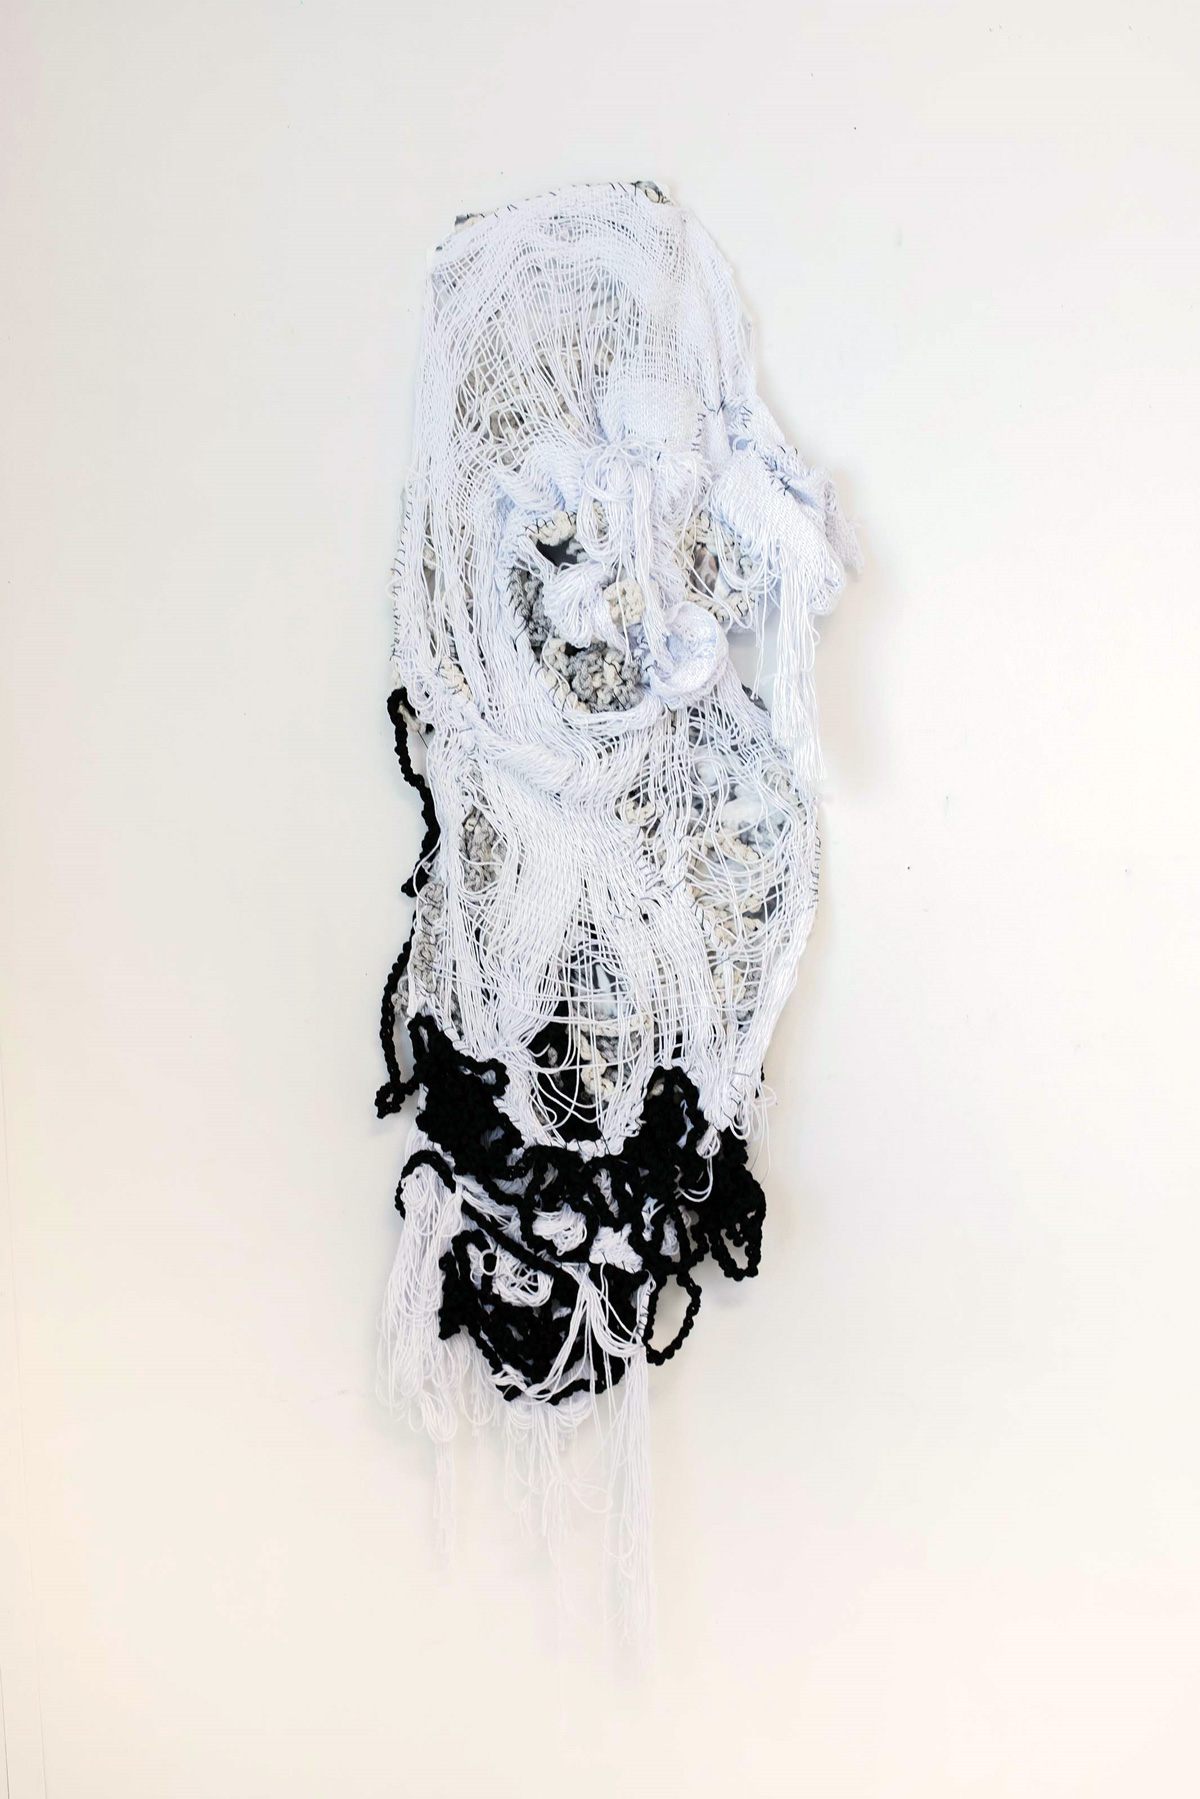 A woven gray, black, and white fiber sculpture hanging vertically on a white wall.